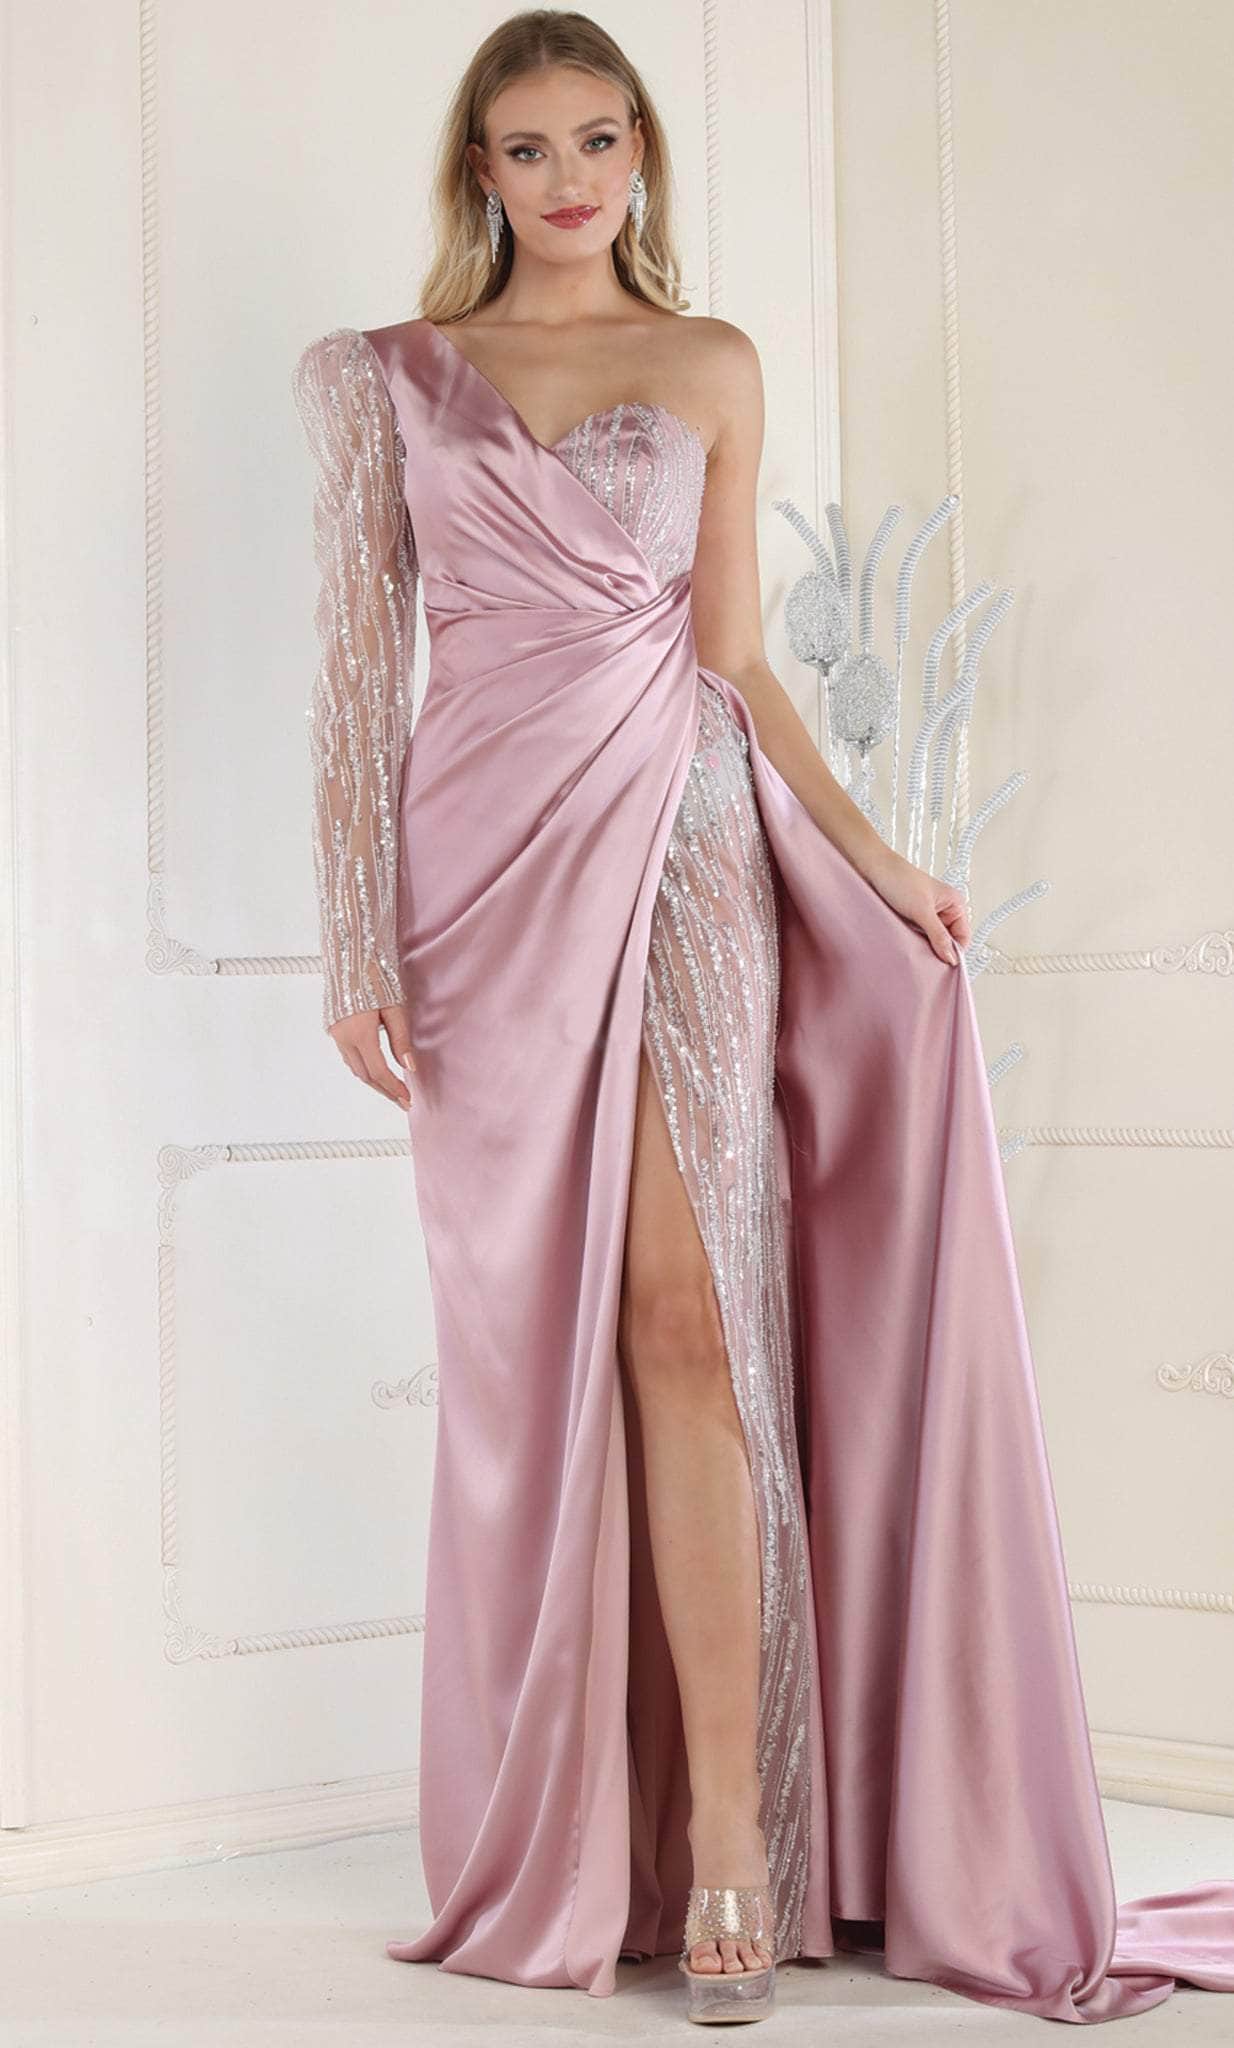 Image of May Queen RQ7980 - One Shoulder High Slit Evening Dress